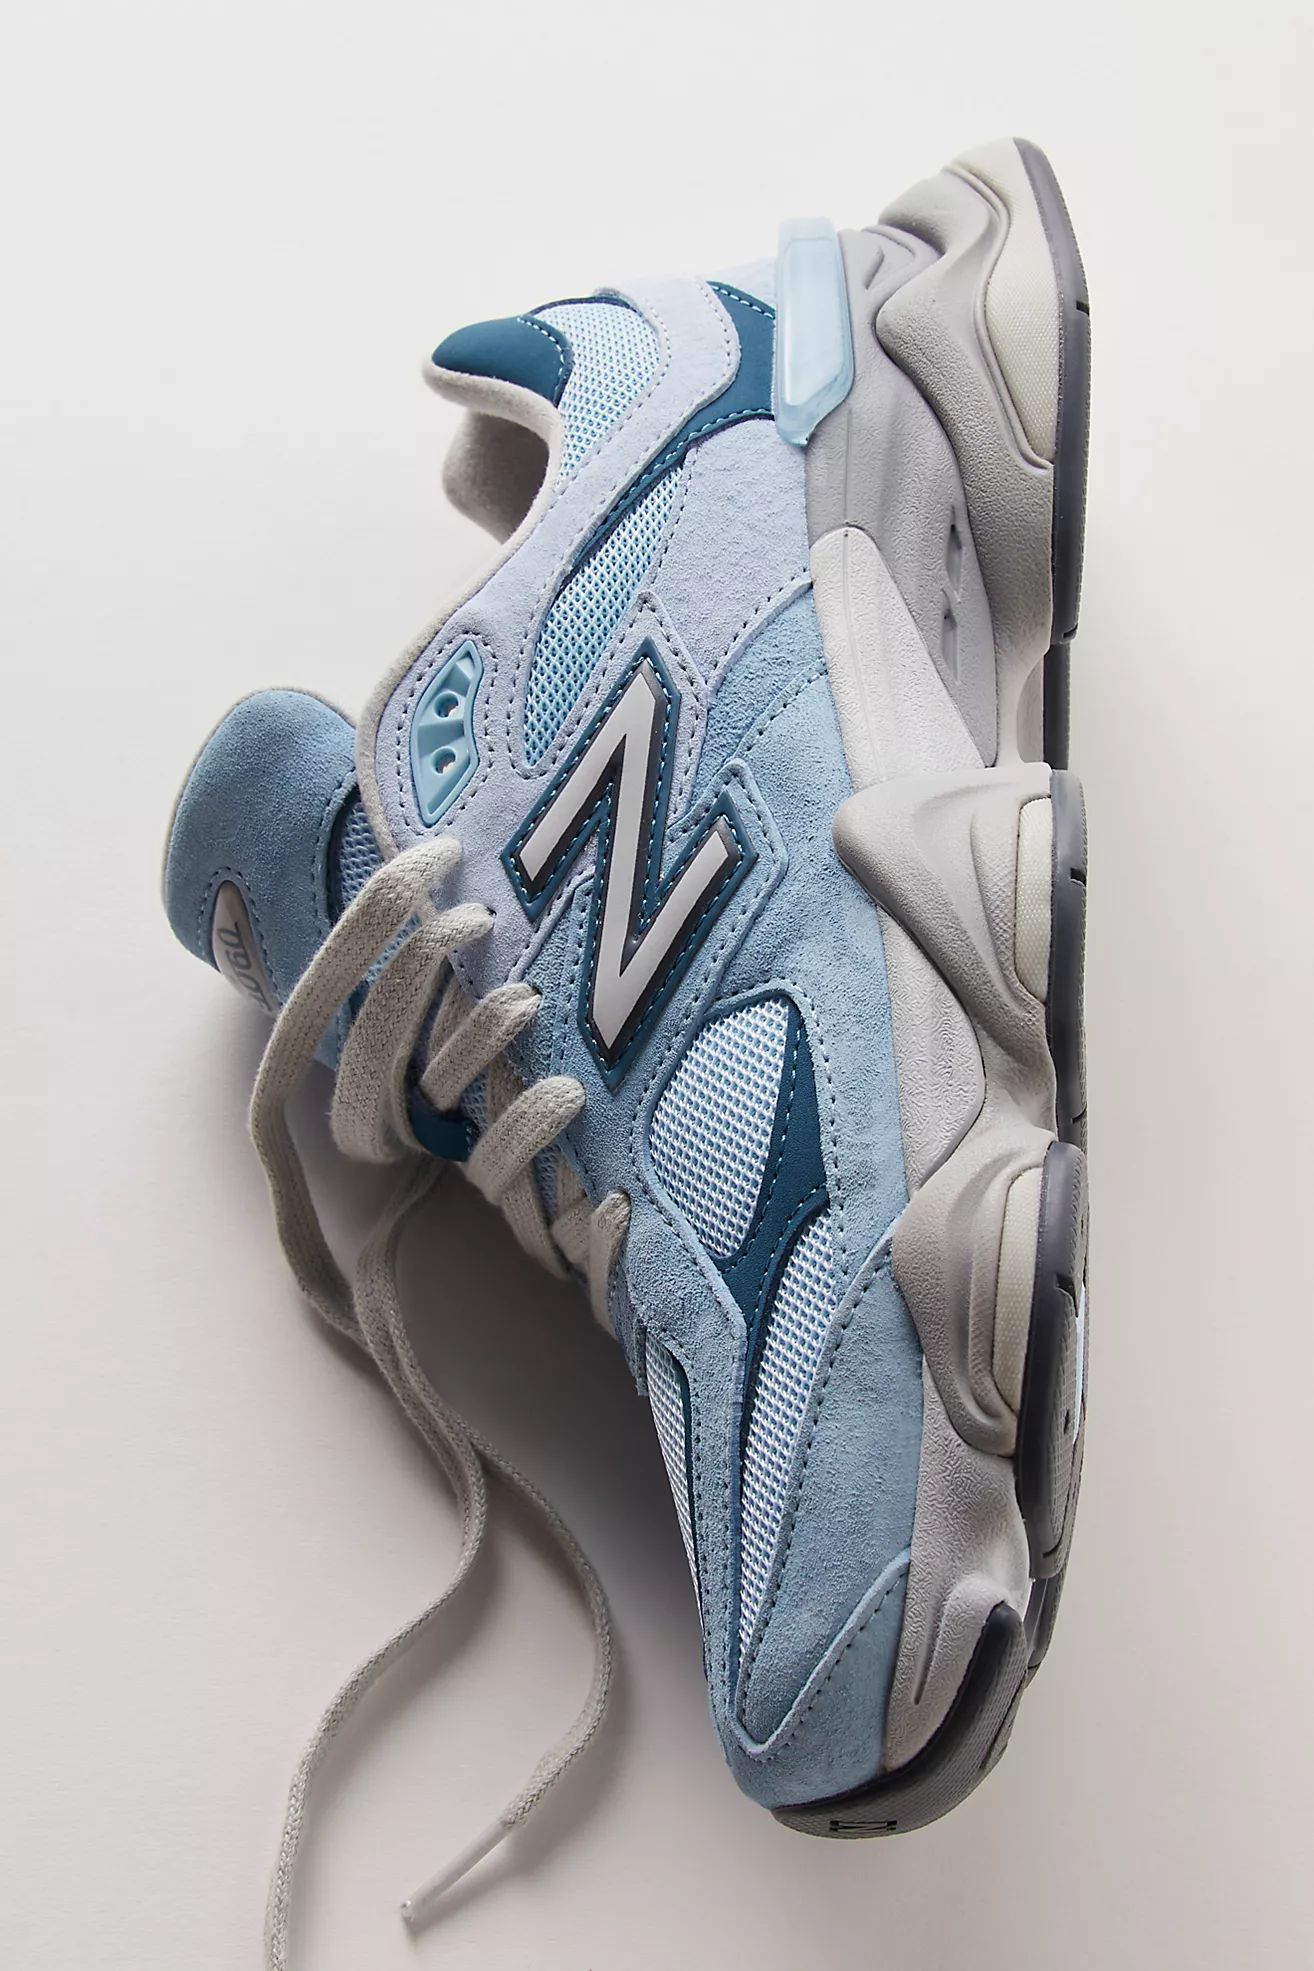 Shop All New Balance | Free People (Global - UK&FR Excluded)